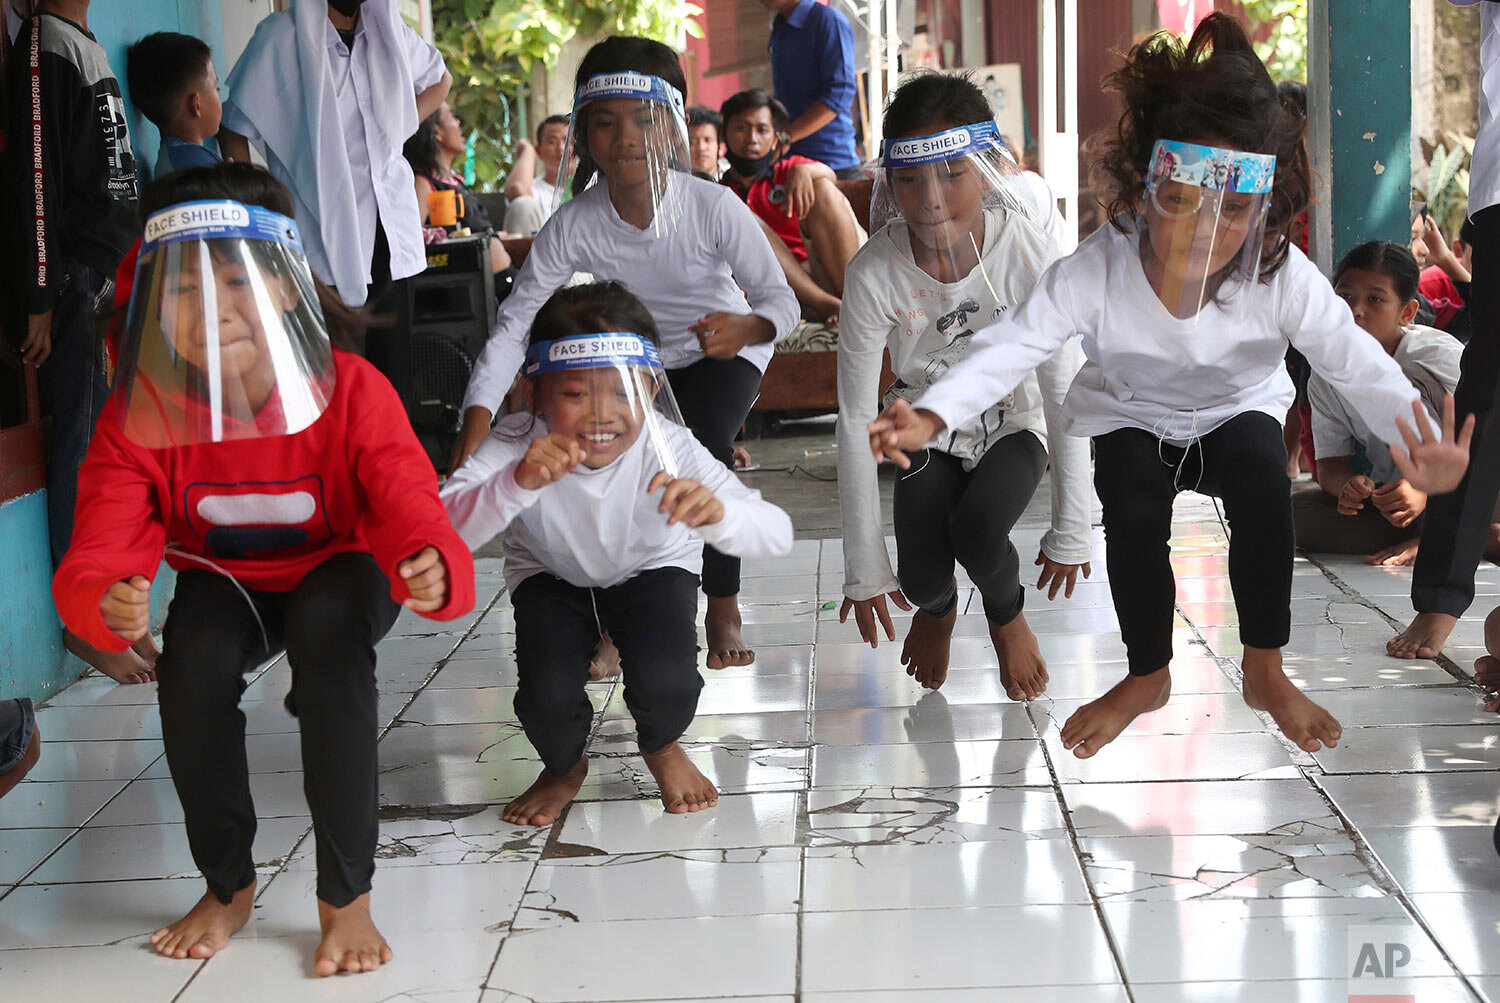  Children wearing face shields as a precaution against the coronavirus take part in a "leap frog" race during a performance held as a part of a celebration of the country's 75th anniversary of independence in Tangerang, Indonesia, Monday, Aug. 17, 20